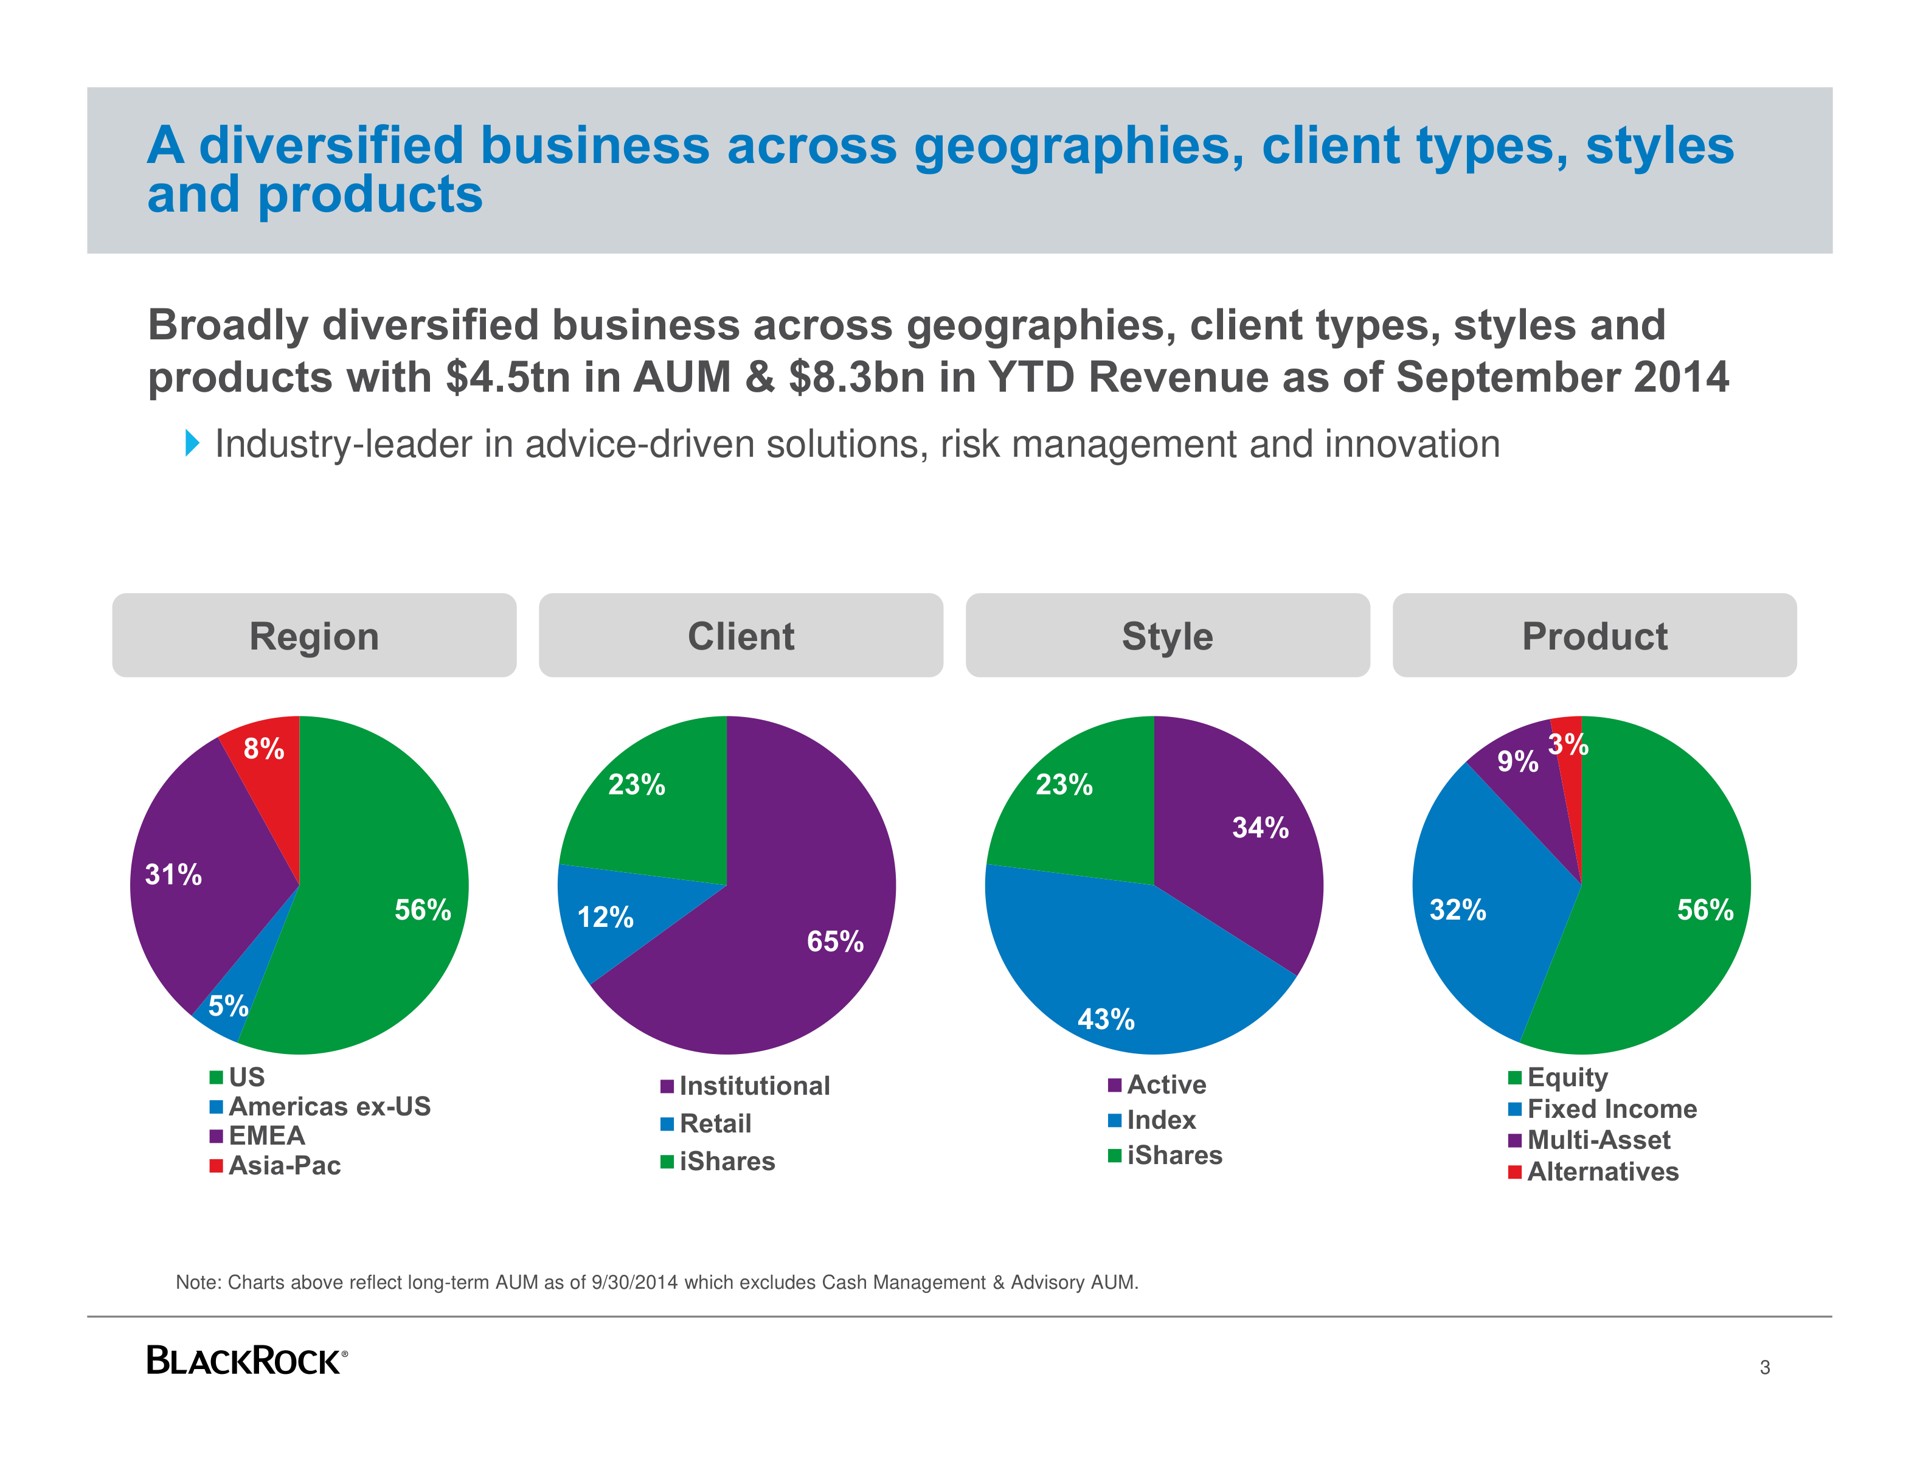 a diversified business across geographies client types styles and products area | BlackRock